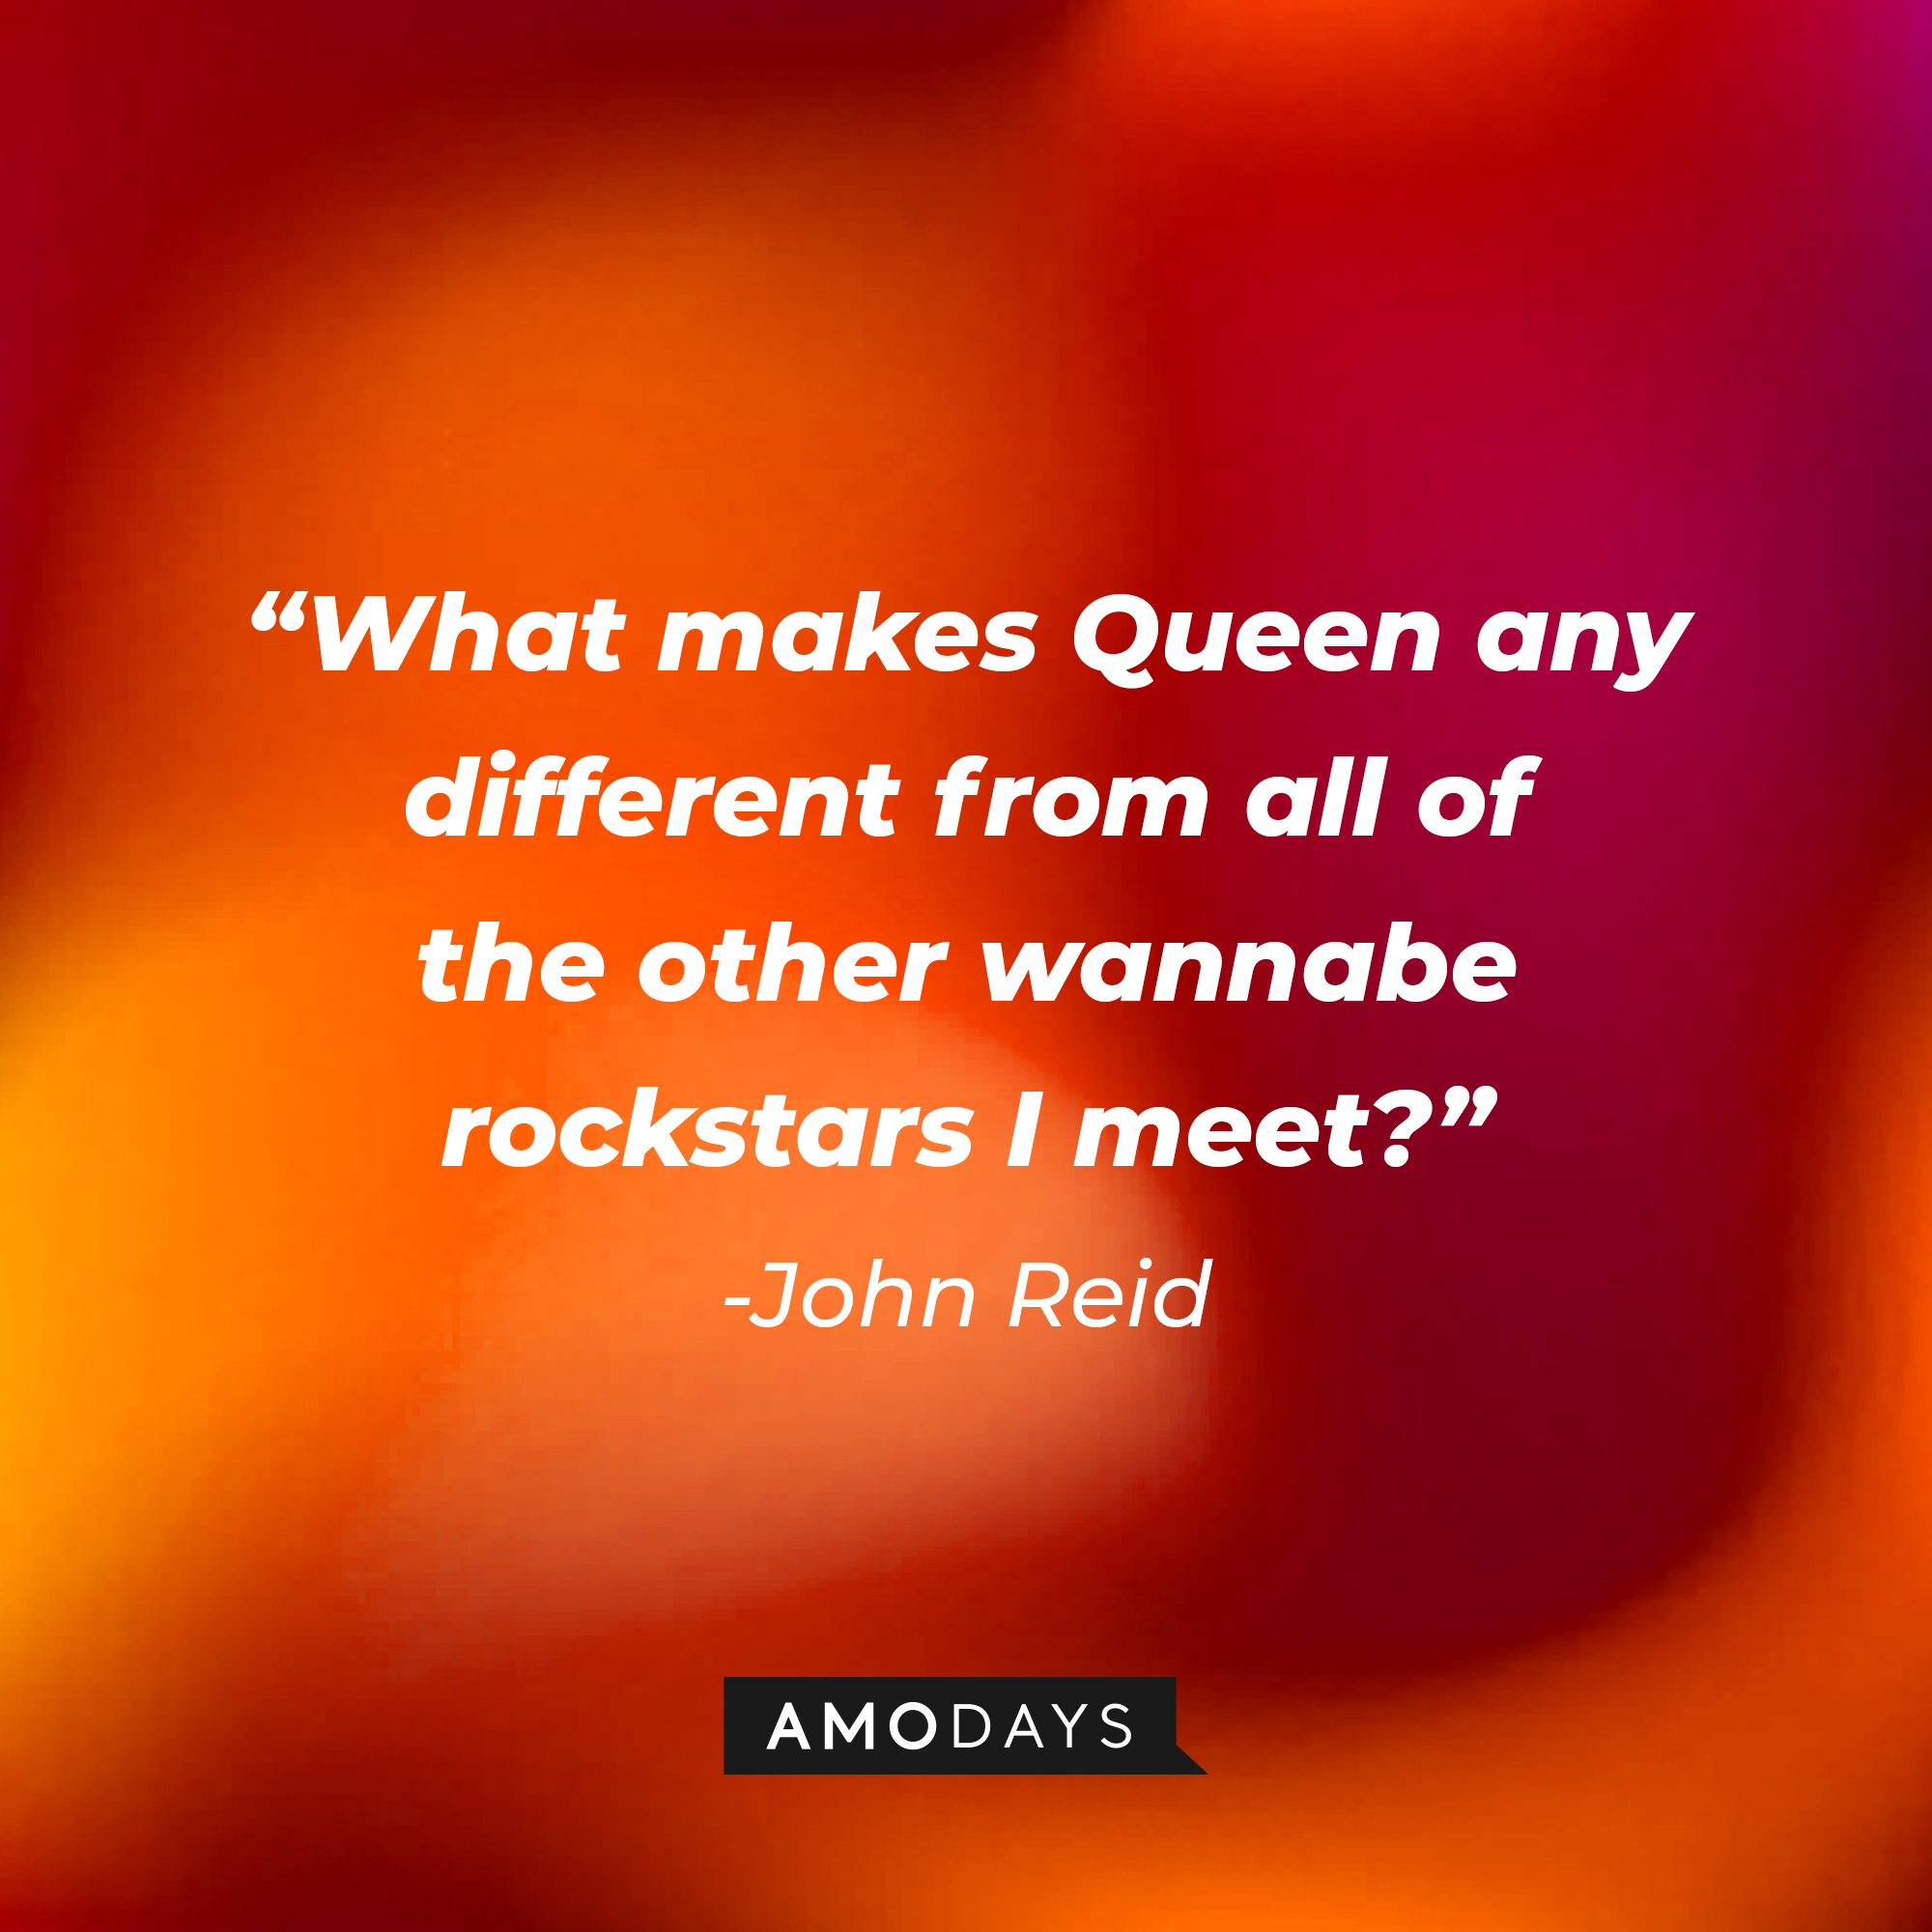 John Reid with his quote: "What makes Queen any different from all of the other wannabe rockstars I meet?" | Source: Amodays